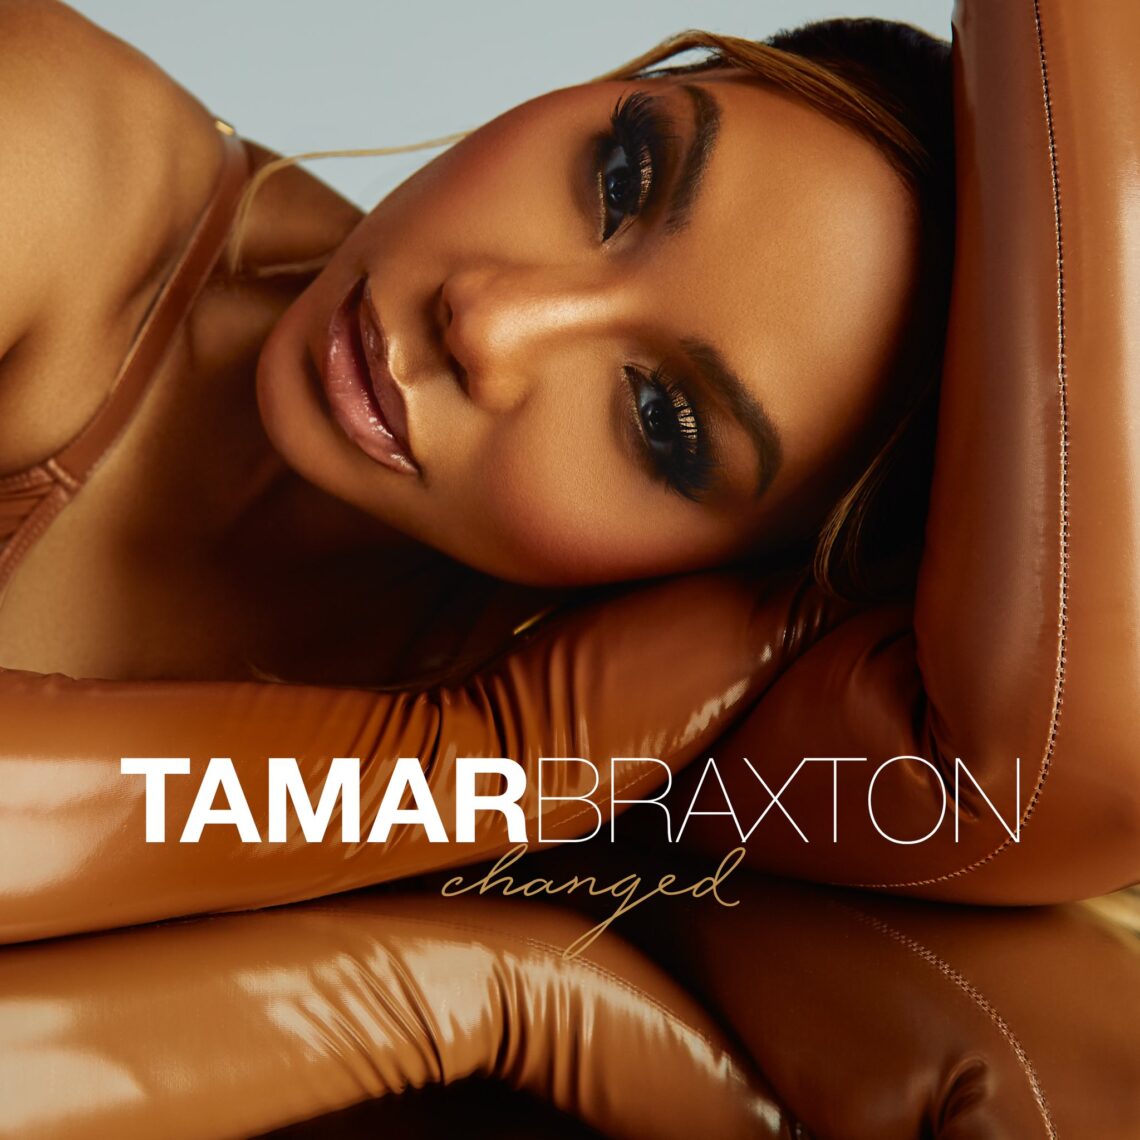 Tamar Braxton Returns With New Song 'Changed'